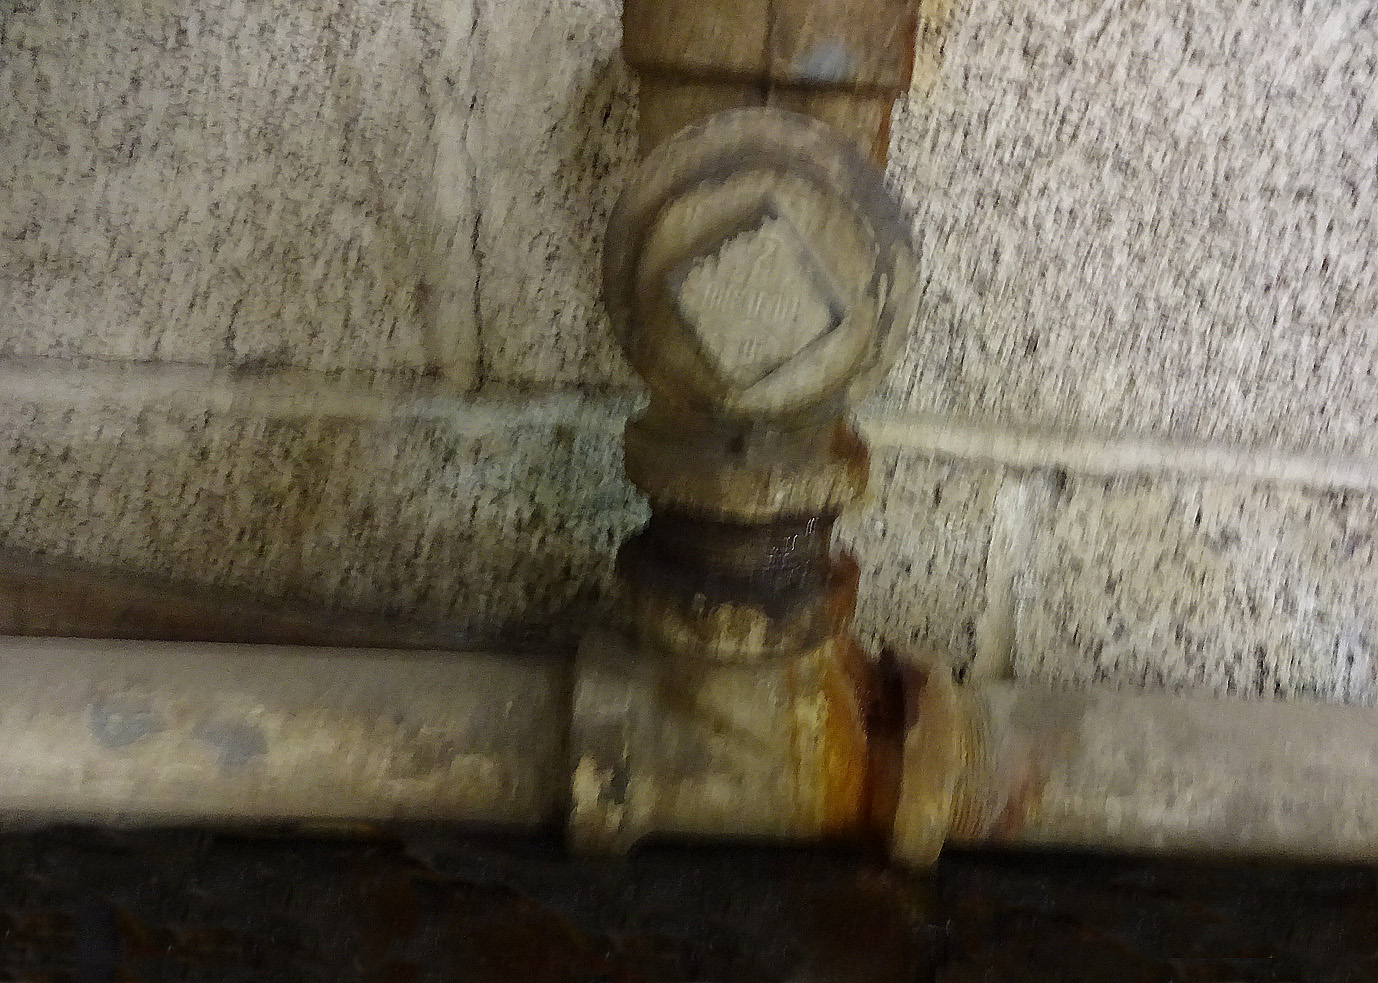 How To Locate And Remove A Sewer Cleanout Cap